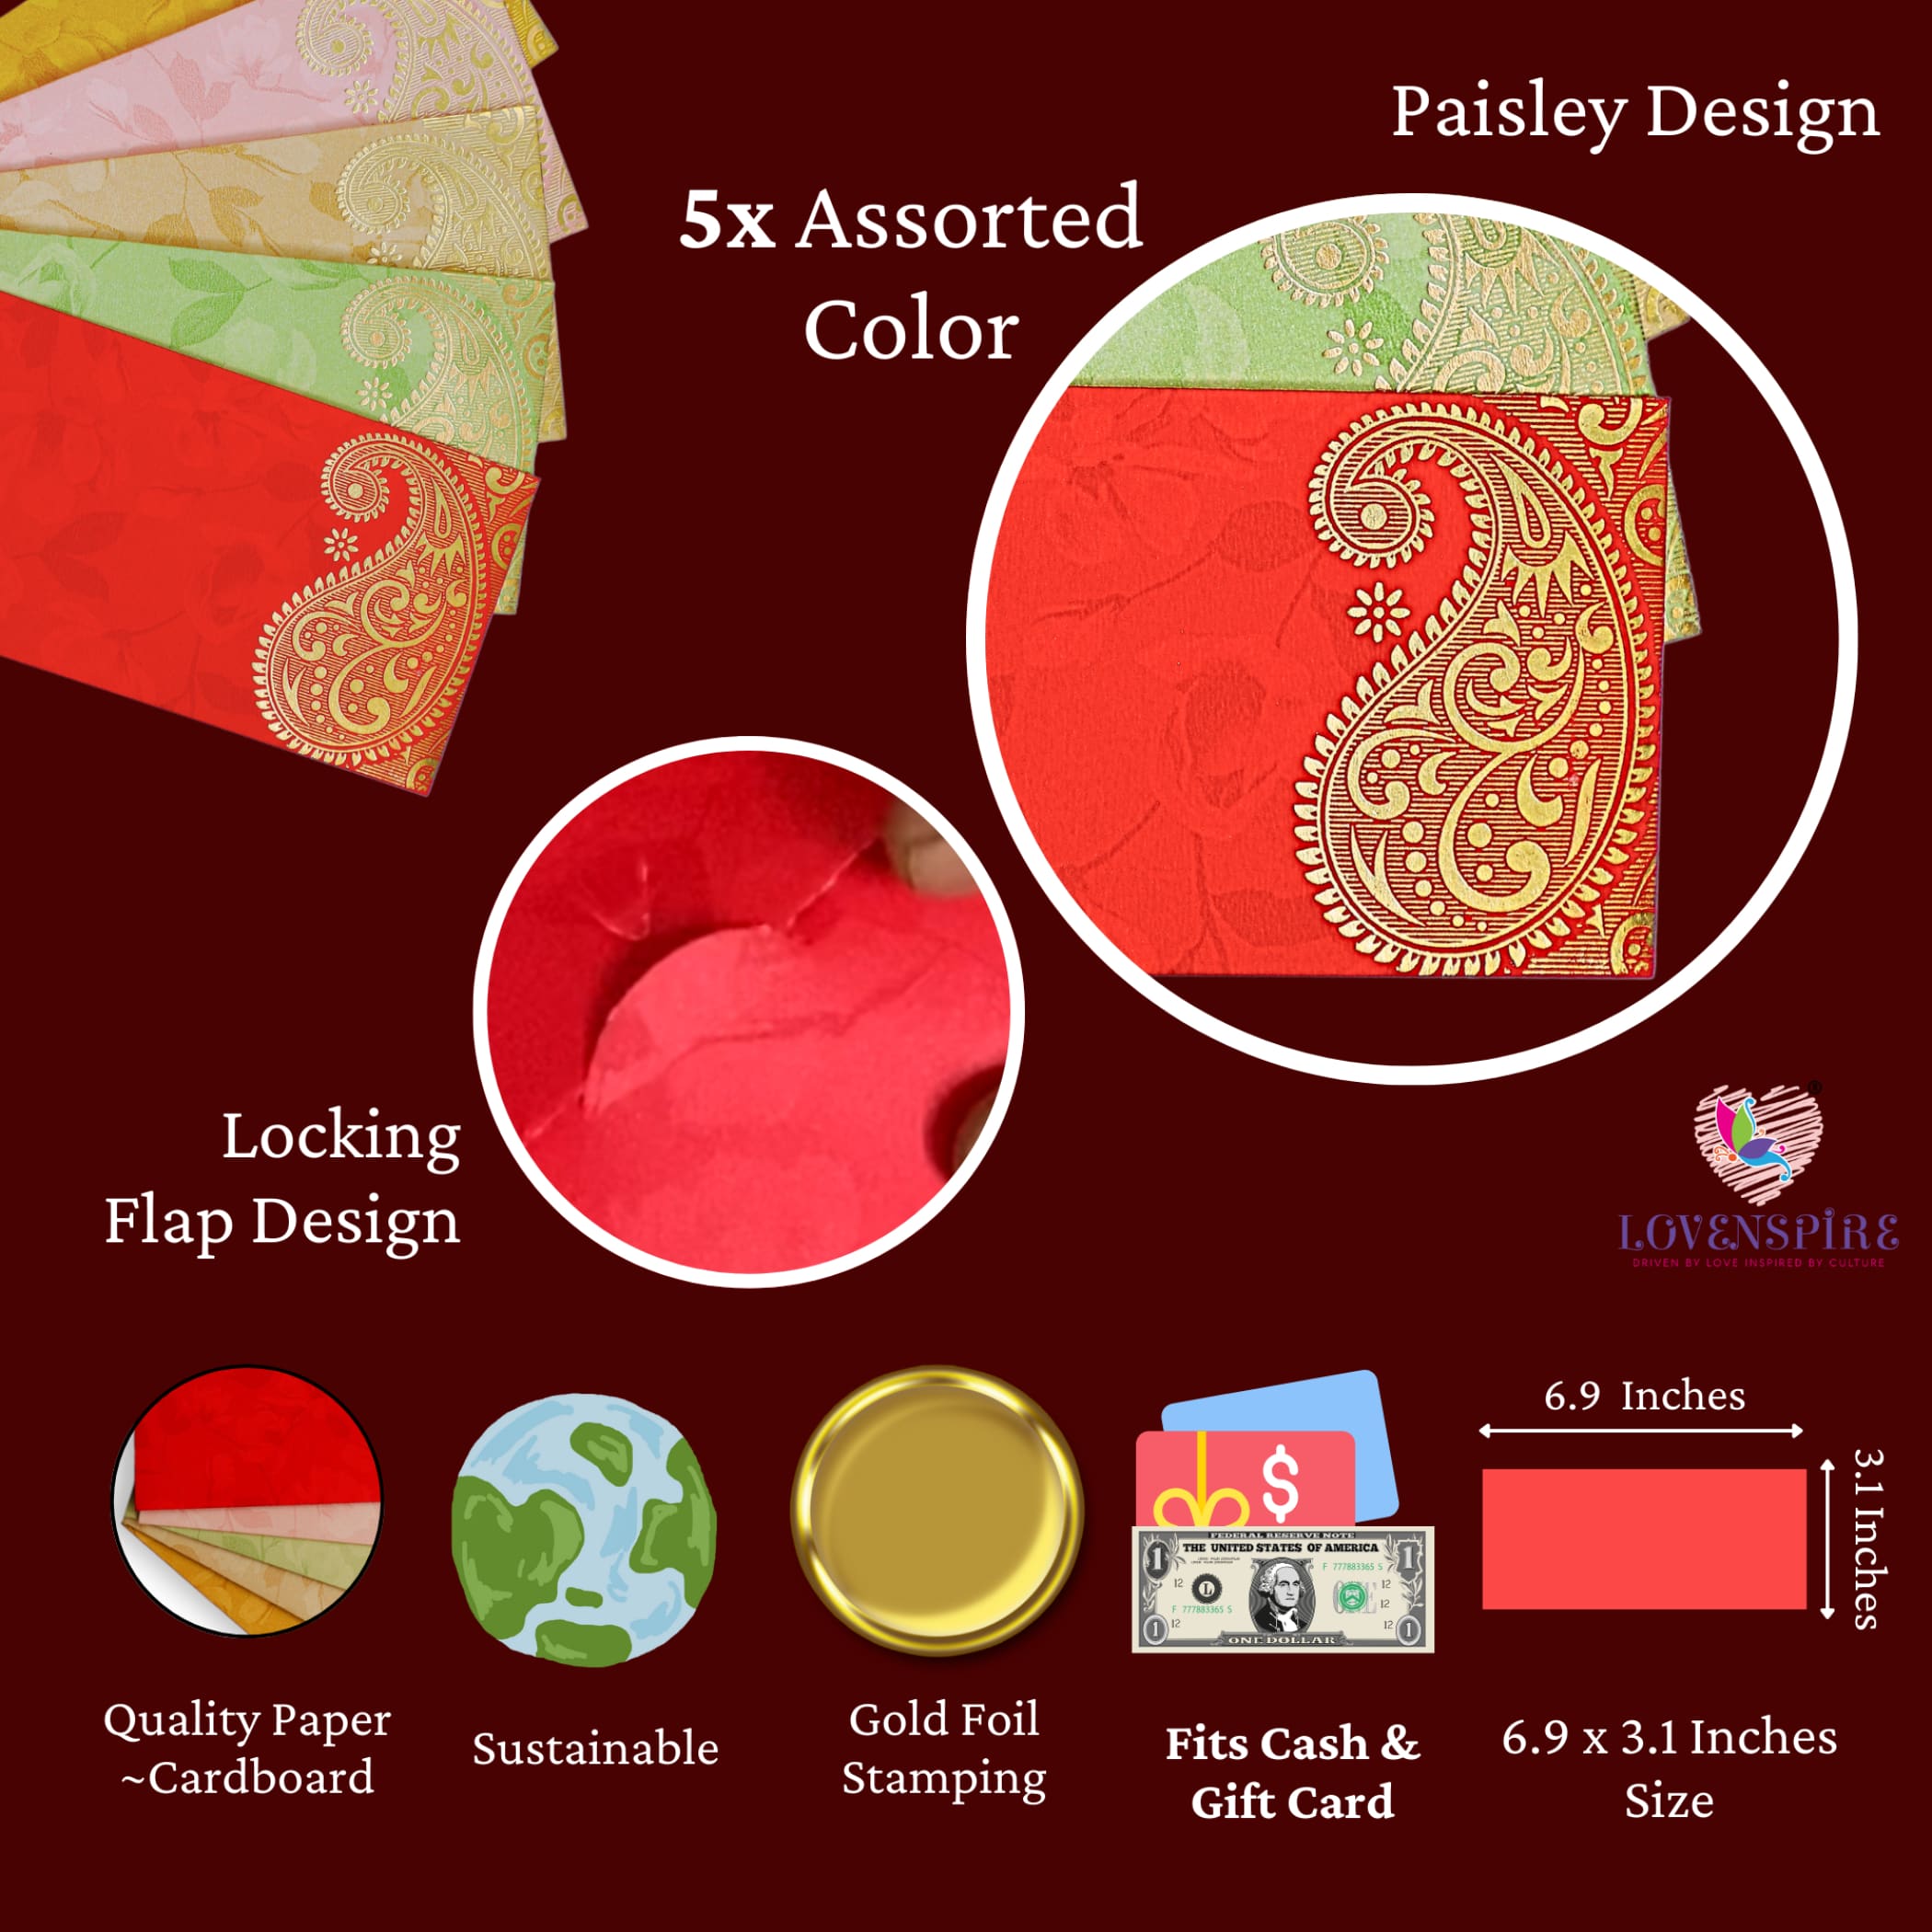 Money envelopes for cash gifts assorted color paisley